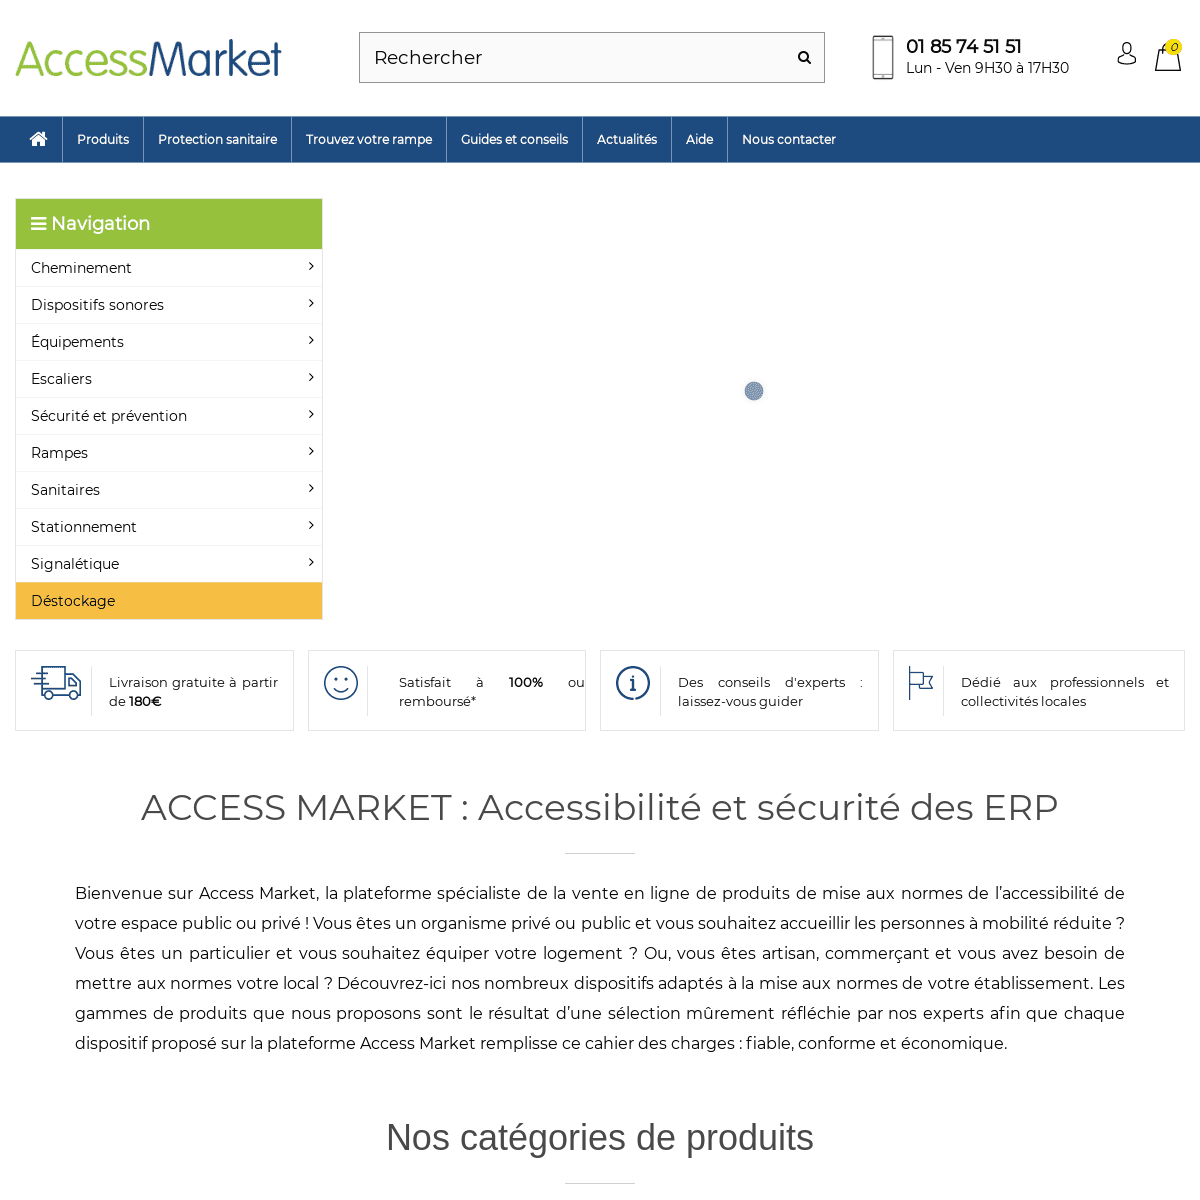 A complete backup of https://access-market.com